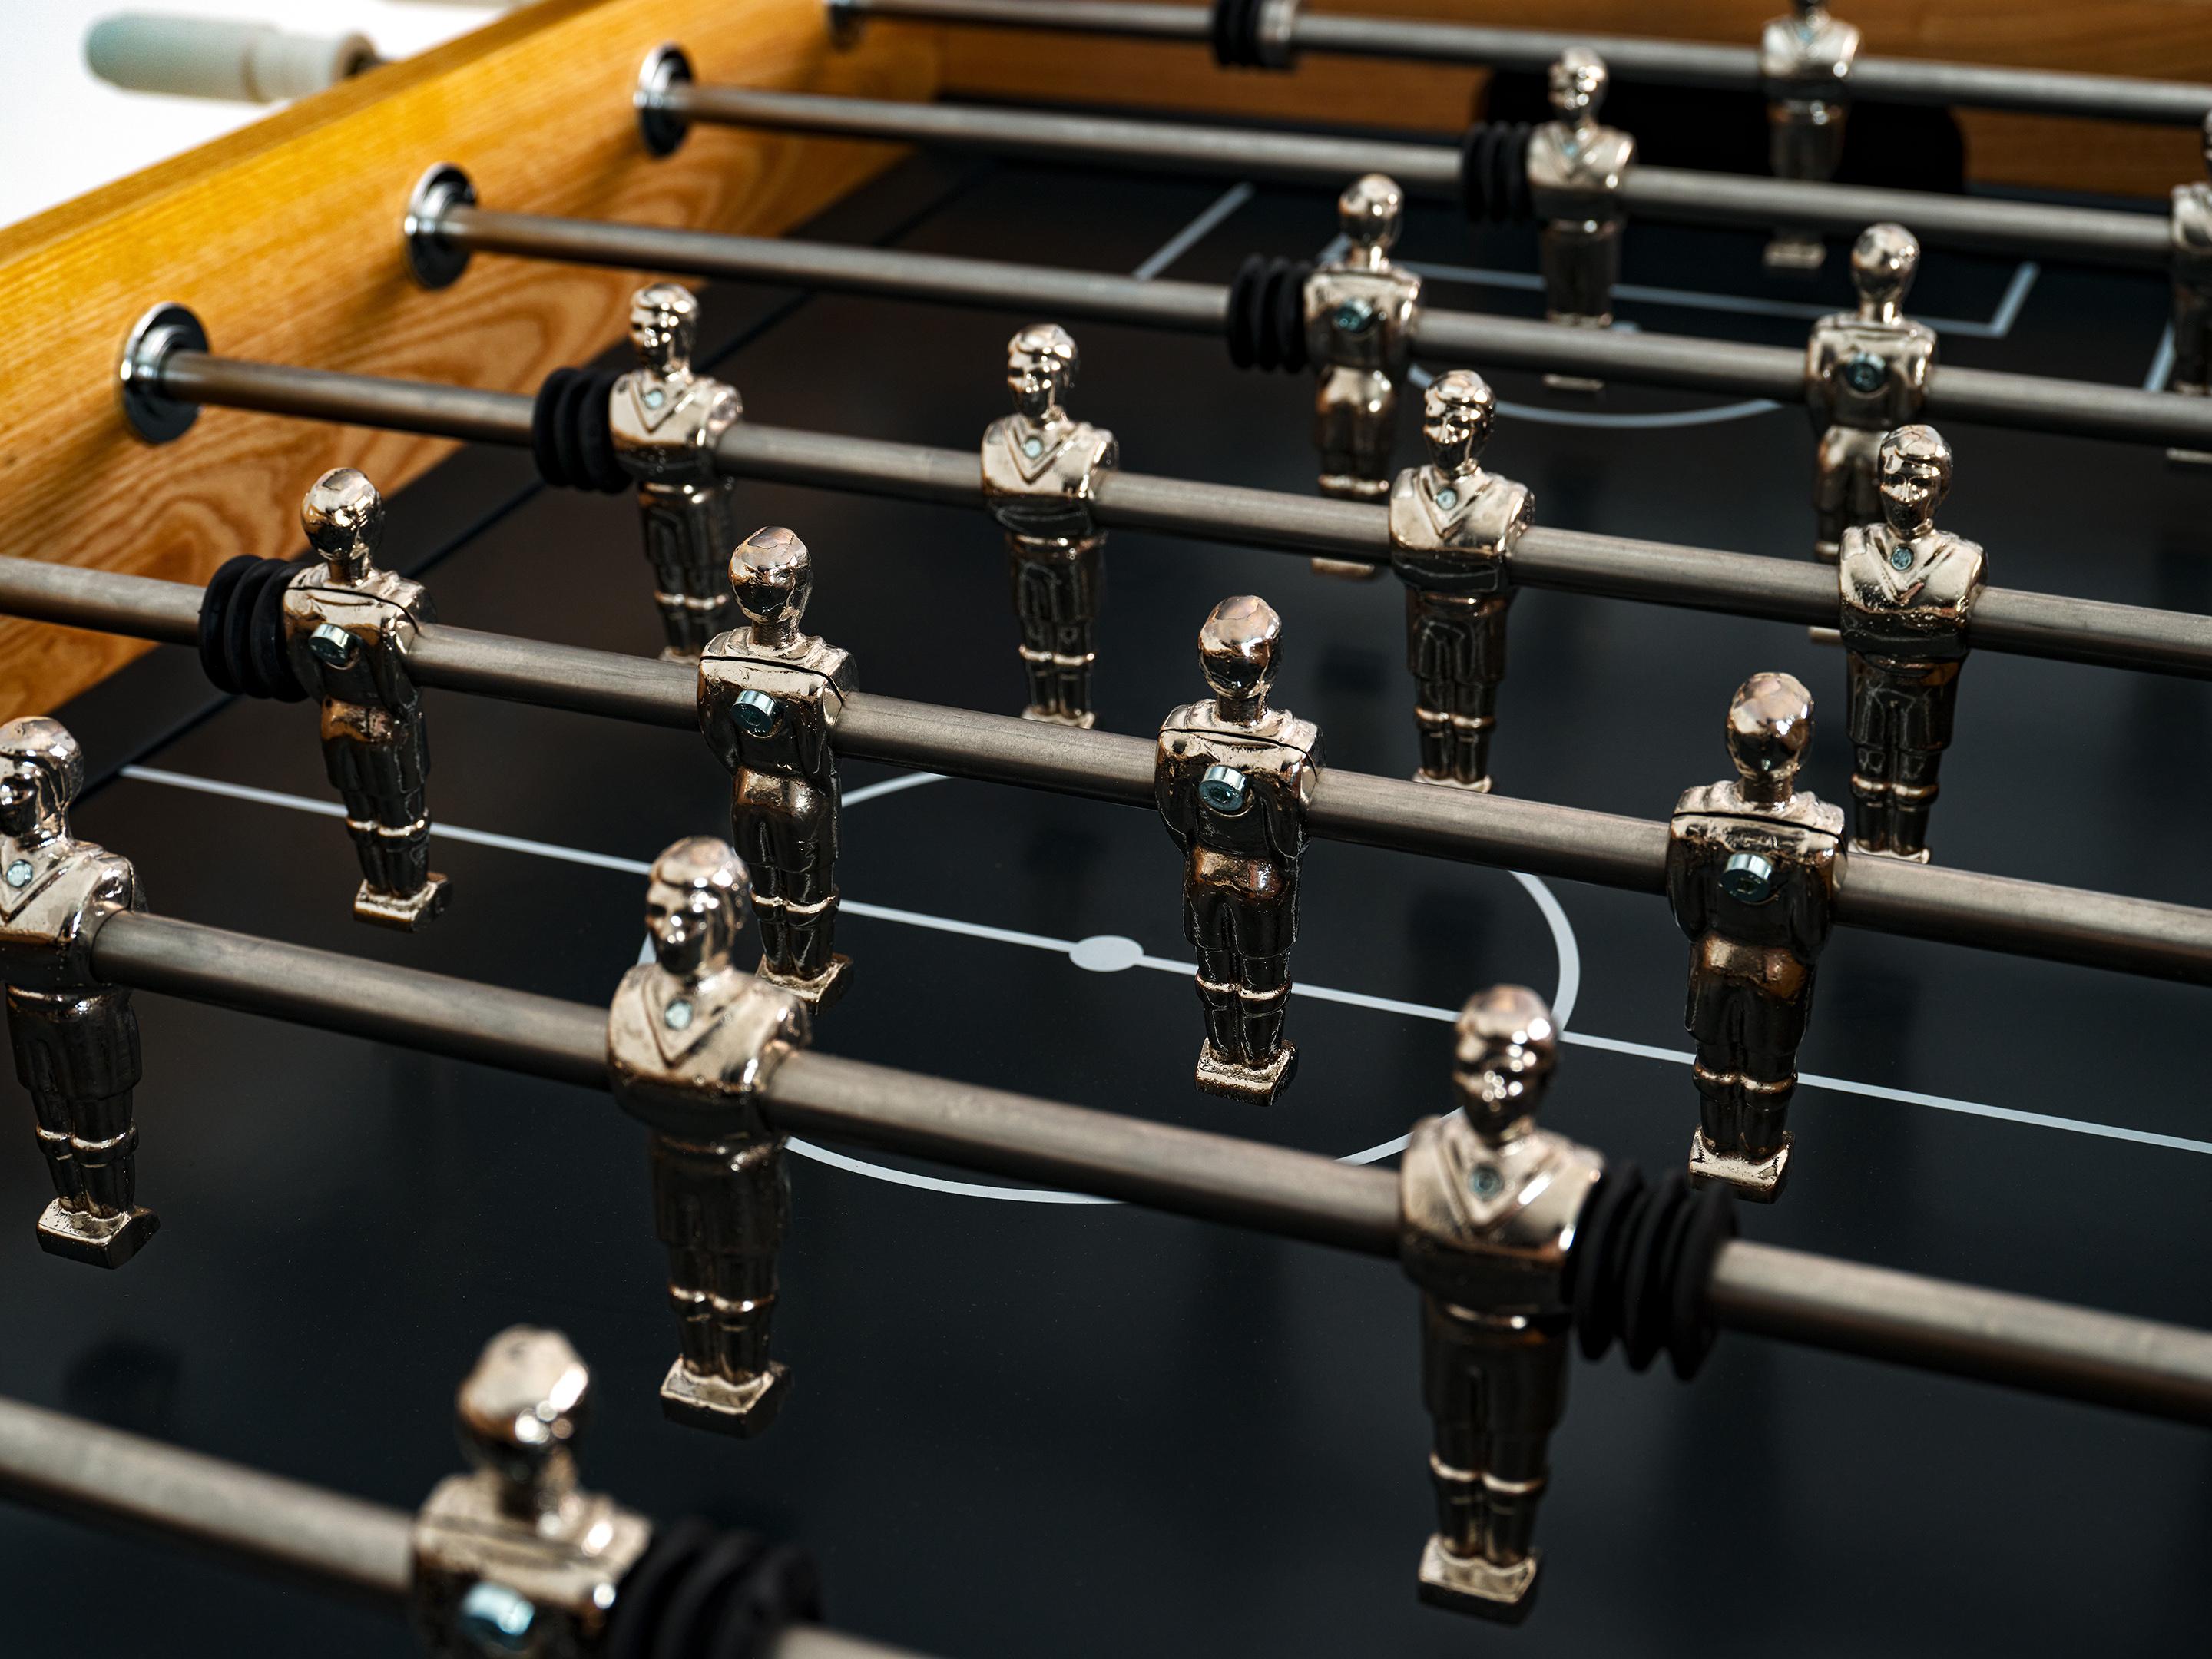 Nobu Modern Ash wood White Steel Leg Foosball Table In New Condition For Sale In Wilmington, DE